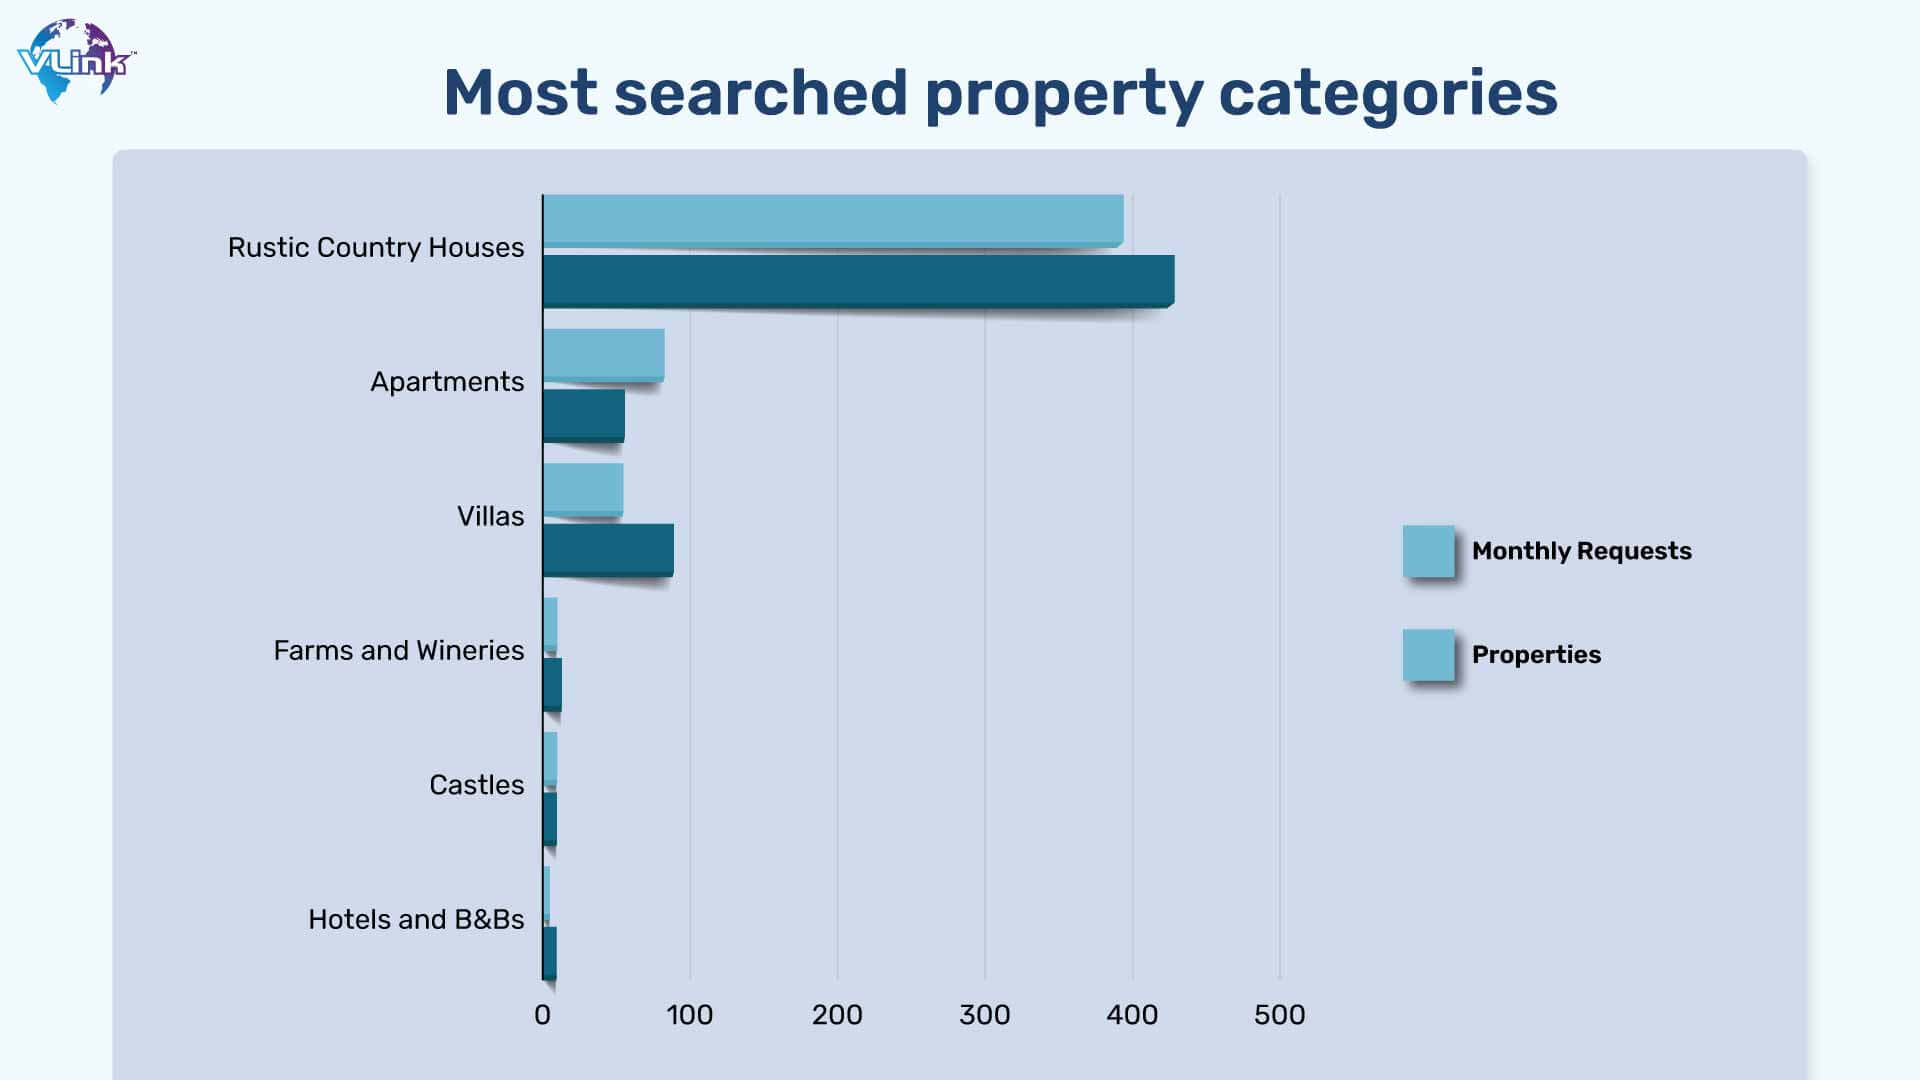 Most searched property categories